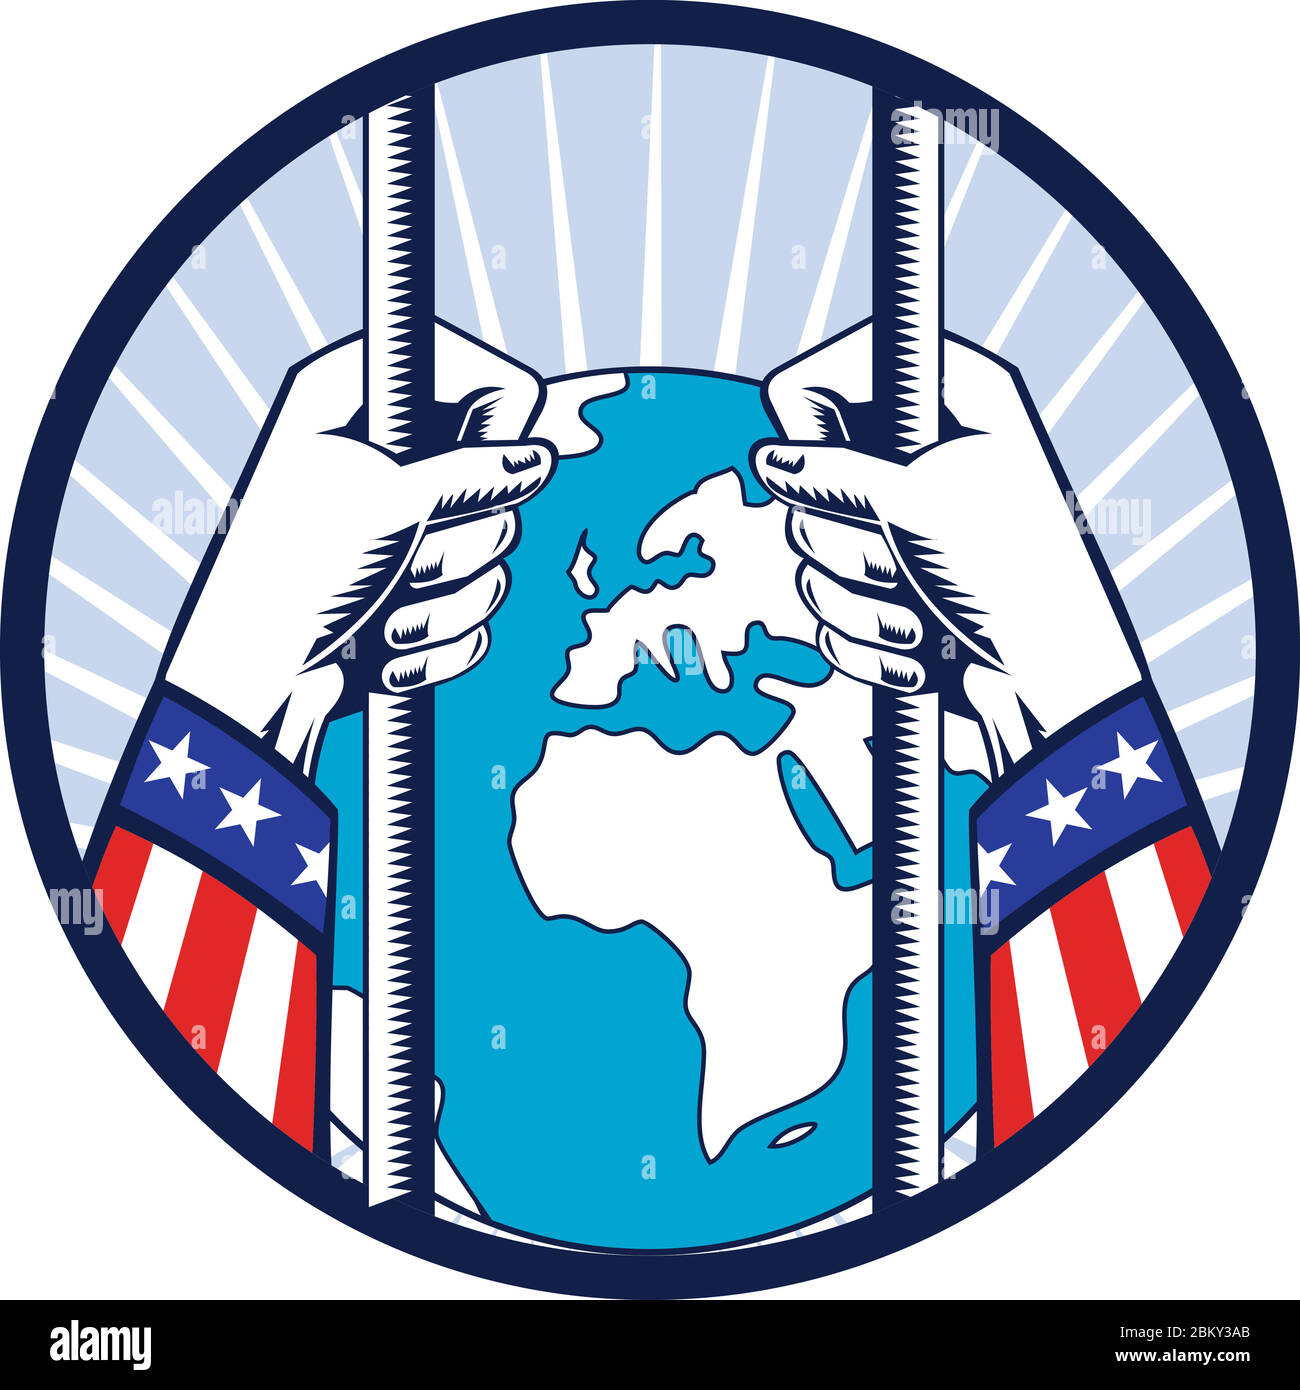 Retro woodcut style illustration of concept of United States of America in total lockdown and isolated from the world showing hands holding prison bar Stock Vector